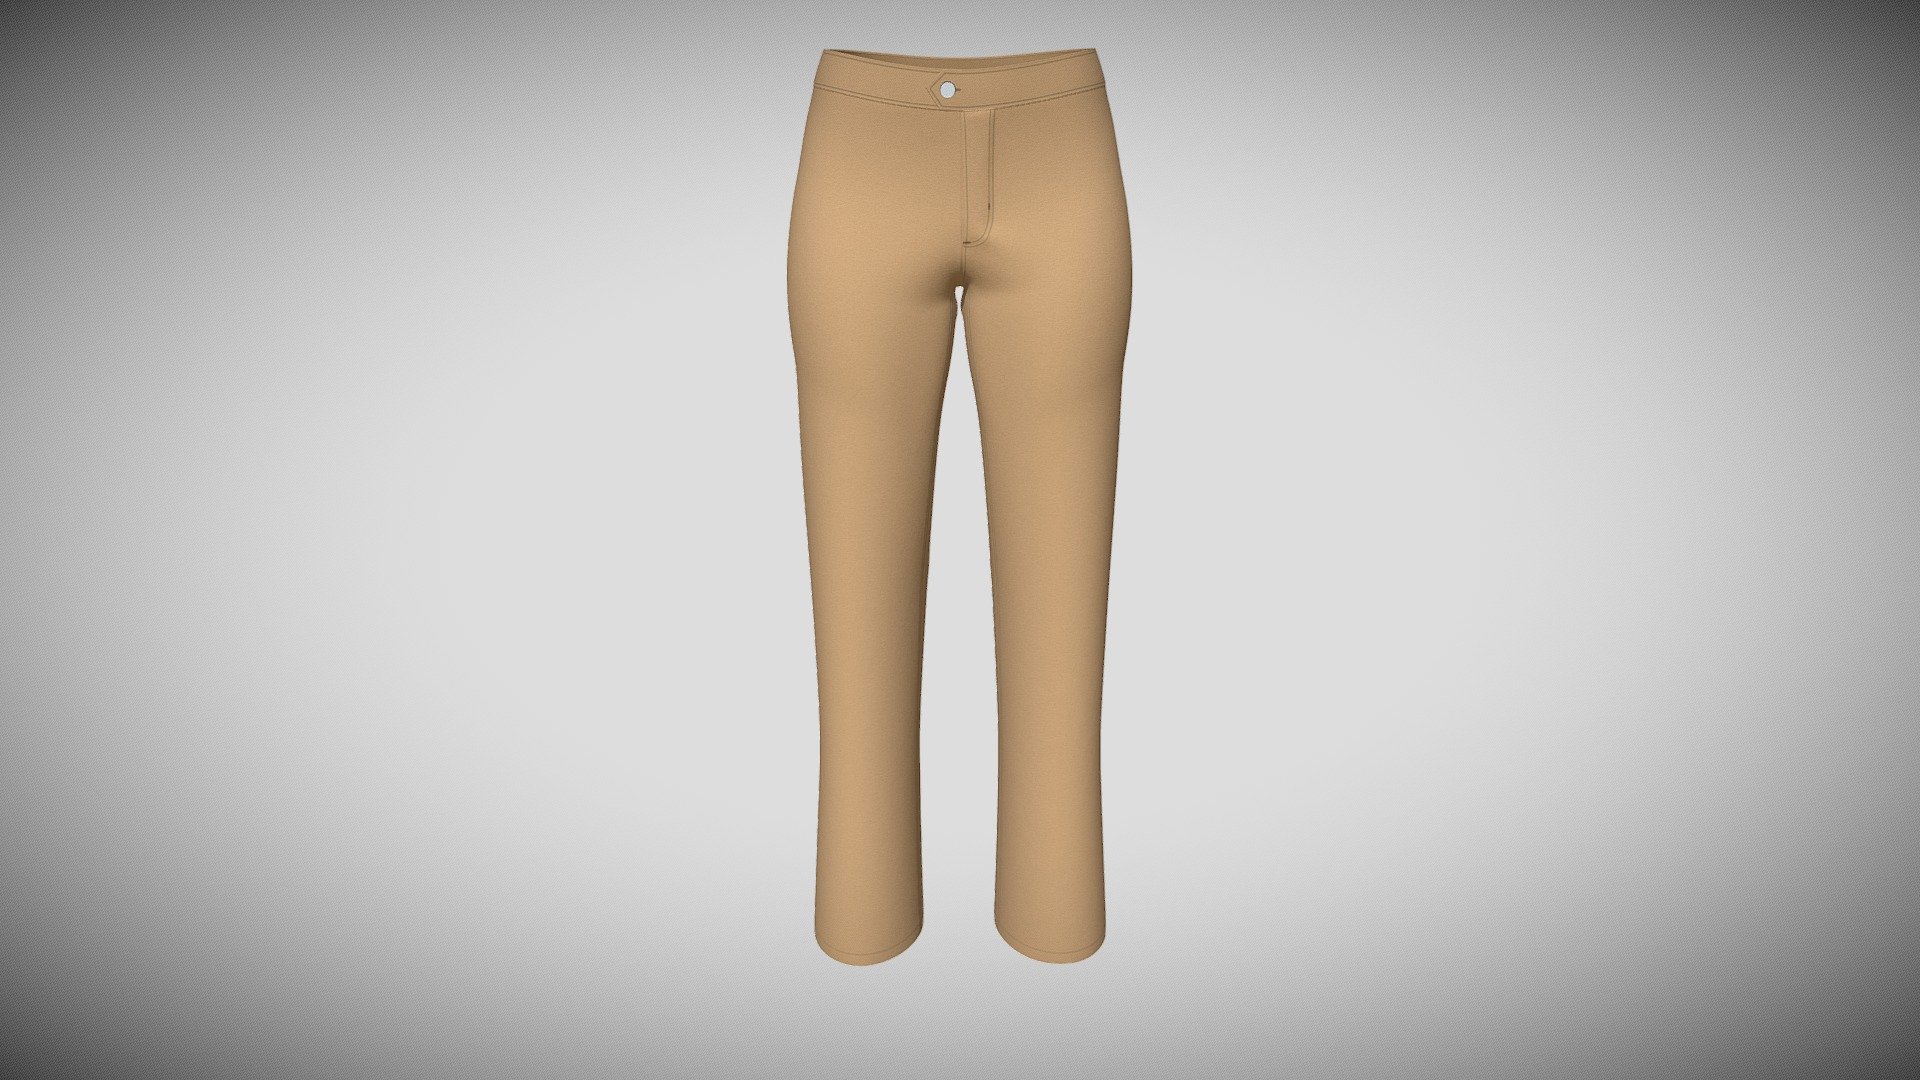 Cloth Title = Slim Classic Work Pants Women Casual Trousers Pant 

SKU = DG100026 

Category = Women 

Product Type = Pant 

Cloth Length = Regular 

Body Fit = Regular Fit 

Occasion = Casual  

Waist Rise = Mid Rise 


Our Services:

3D Apparel Design.

OBJ,FBX,GLTF Making with High/Low Poly.

Fabric Digitalization.

Mockup making.

3D Teck Pack.

Pattern Making.

2D Illustration.

Cloth Animation and 360 Spin Video.


Contact us:- 

Email: info@digitalfashionwear.com 

Website: https://digitalfashionwear.com 


We designed all the types of cloth specially focused on product visualization, e-commerce, fitting, and production. 

We will design: 

T-shirts 

Polo shirts 

Hoodies 

Sweatshirt 

Jackets 

Shirts 

TankTops 

Trousers 

Bras 

Underwear 

Blazer 

Aprons 

Leggings 

and All Fashion items. 





Our goal is to make sure what we provide you, meets your demand 3d model